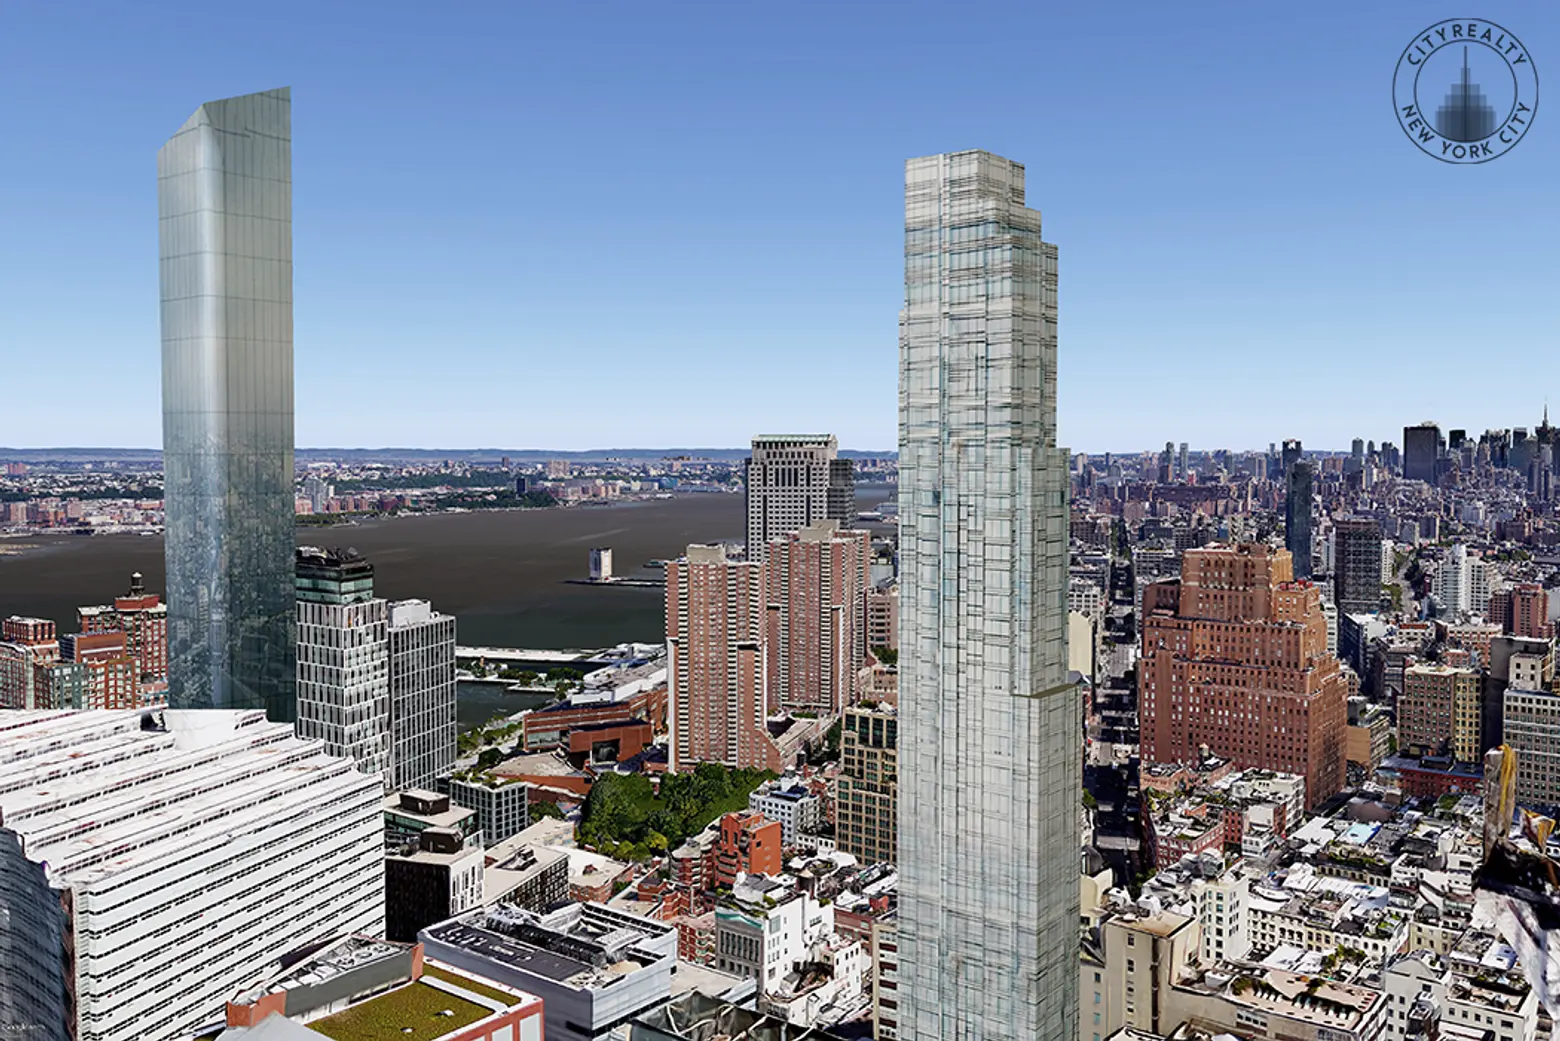 45 Park Place, Michel Abboud, SOMA Architects, Soho Properties, Ground Zero Mosque, 111 Murray Street